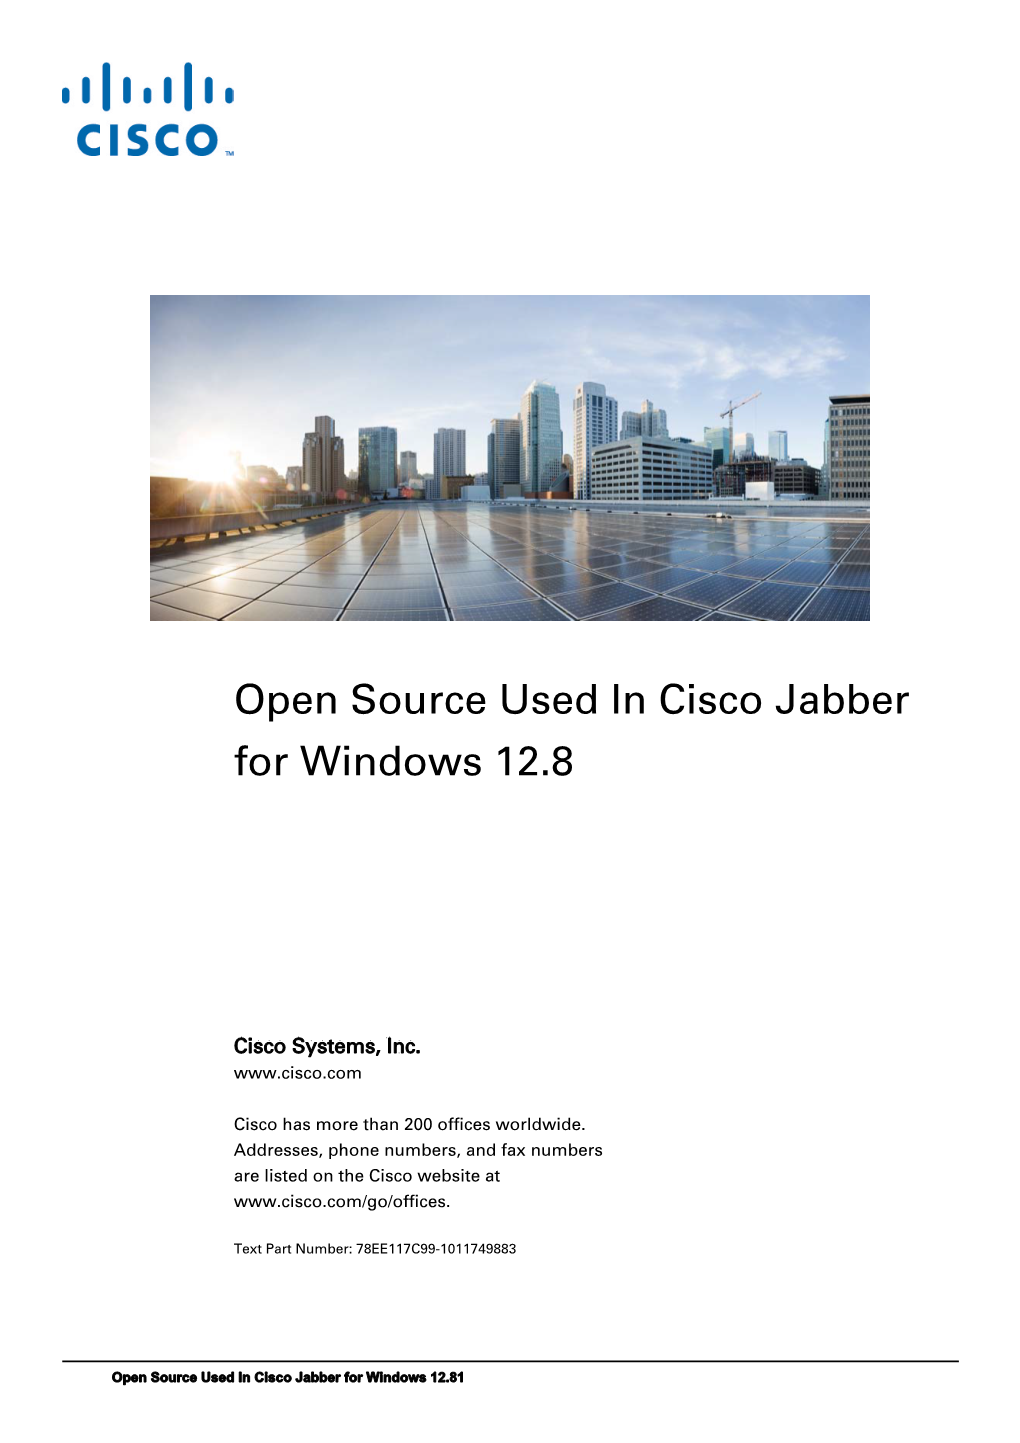 Open Source Used in Cisco Jabber for Windows 12.8